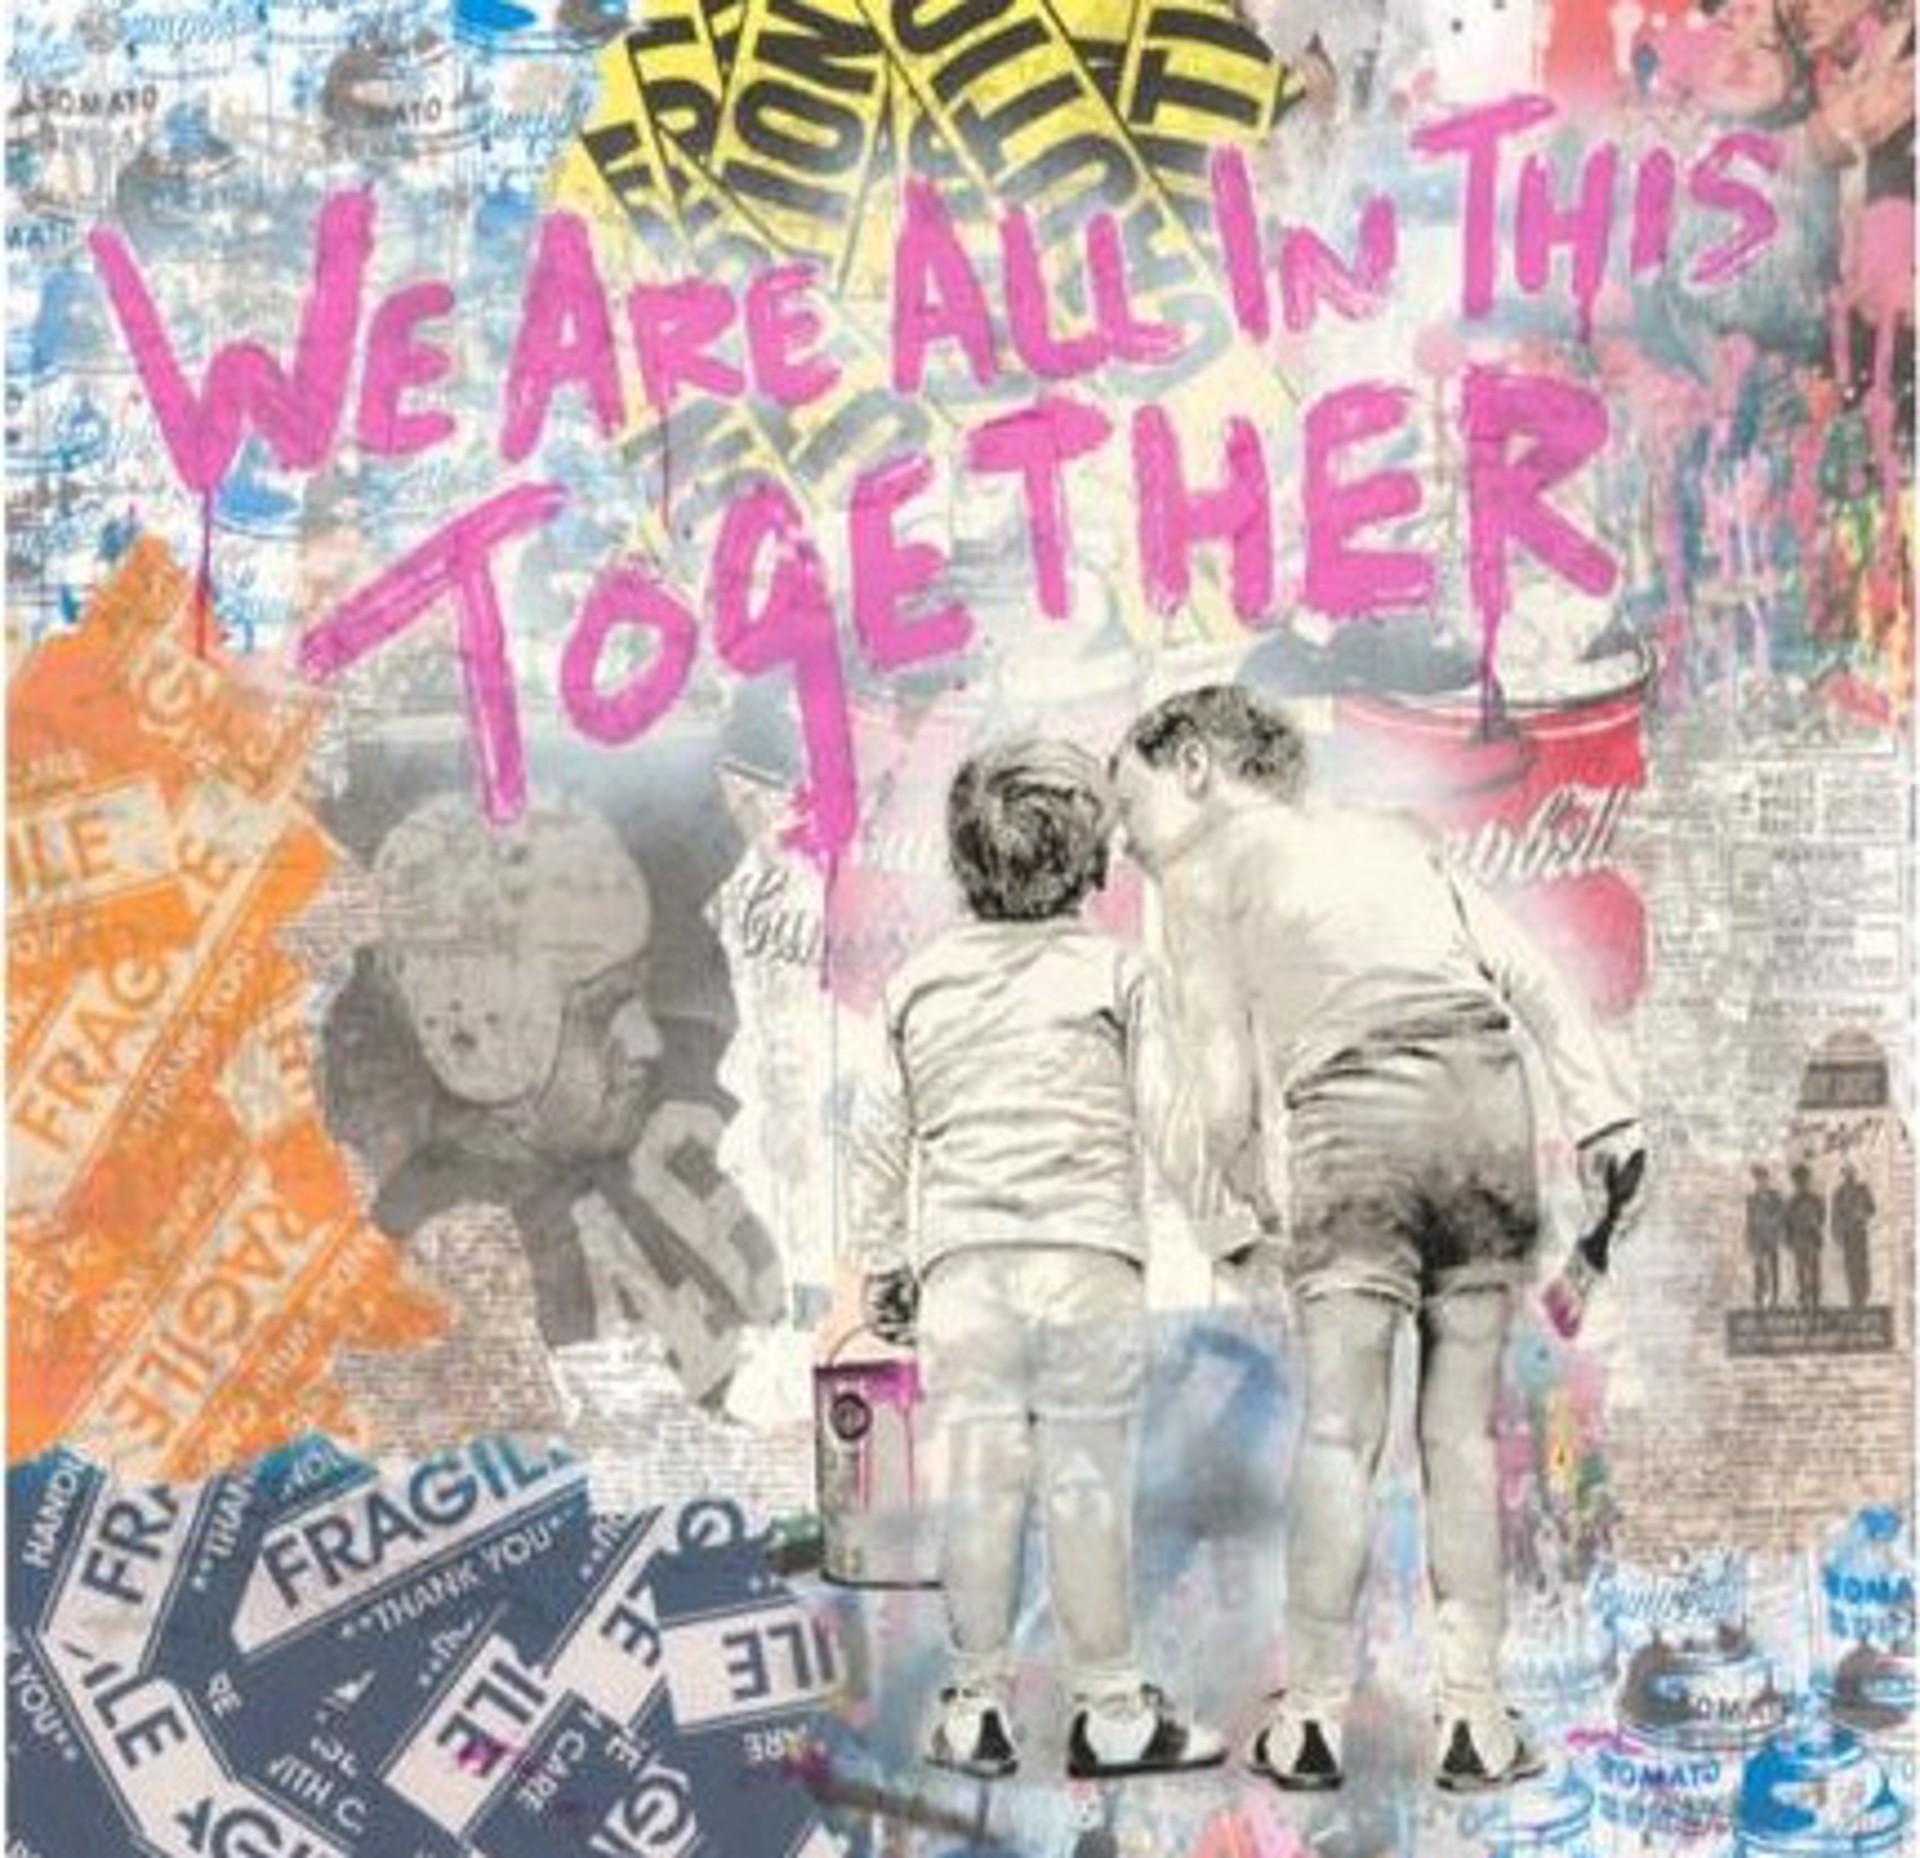 We Are All In This Together by Mr. Brainwash